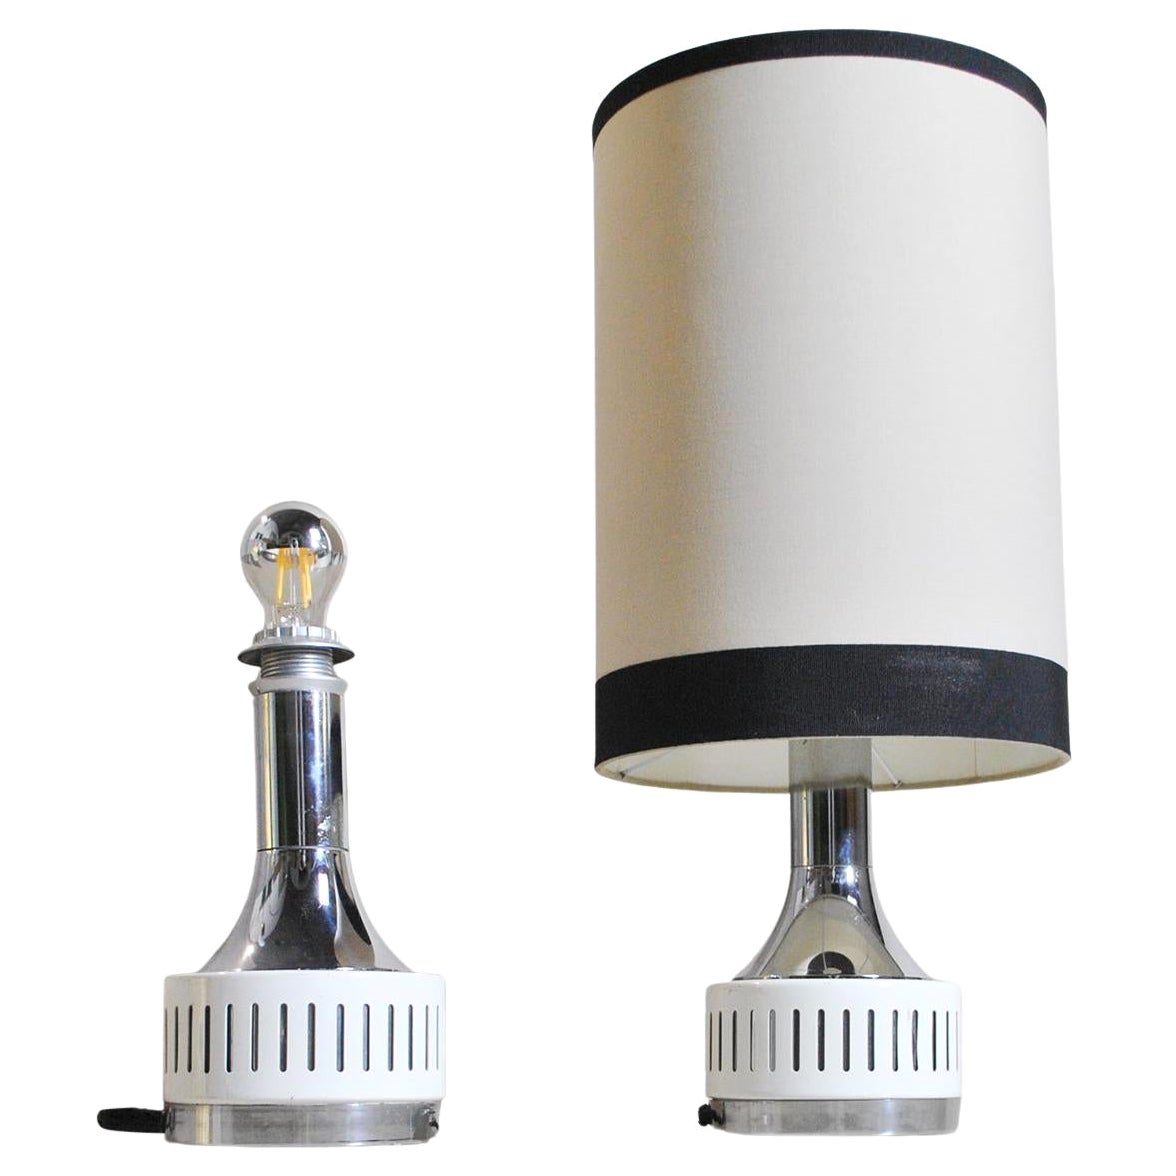 Italian Midcentury Table Lamps from the Sixties